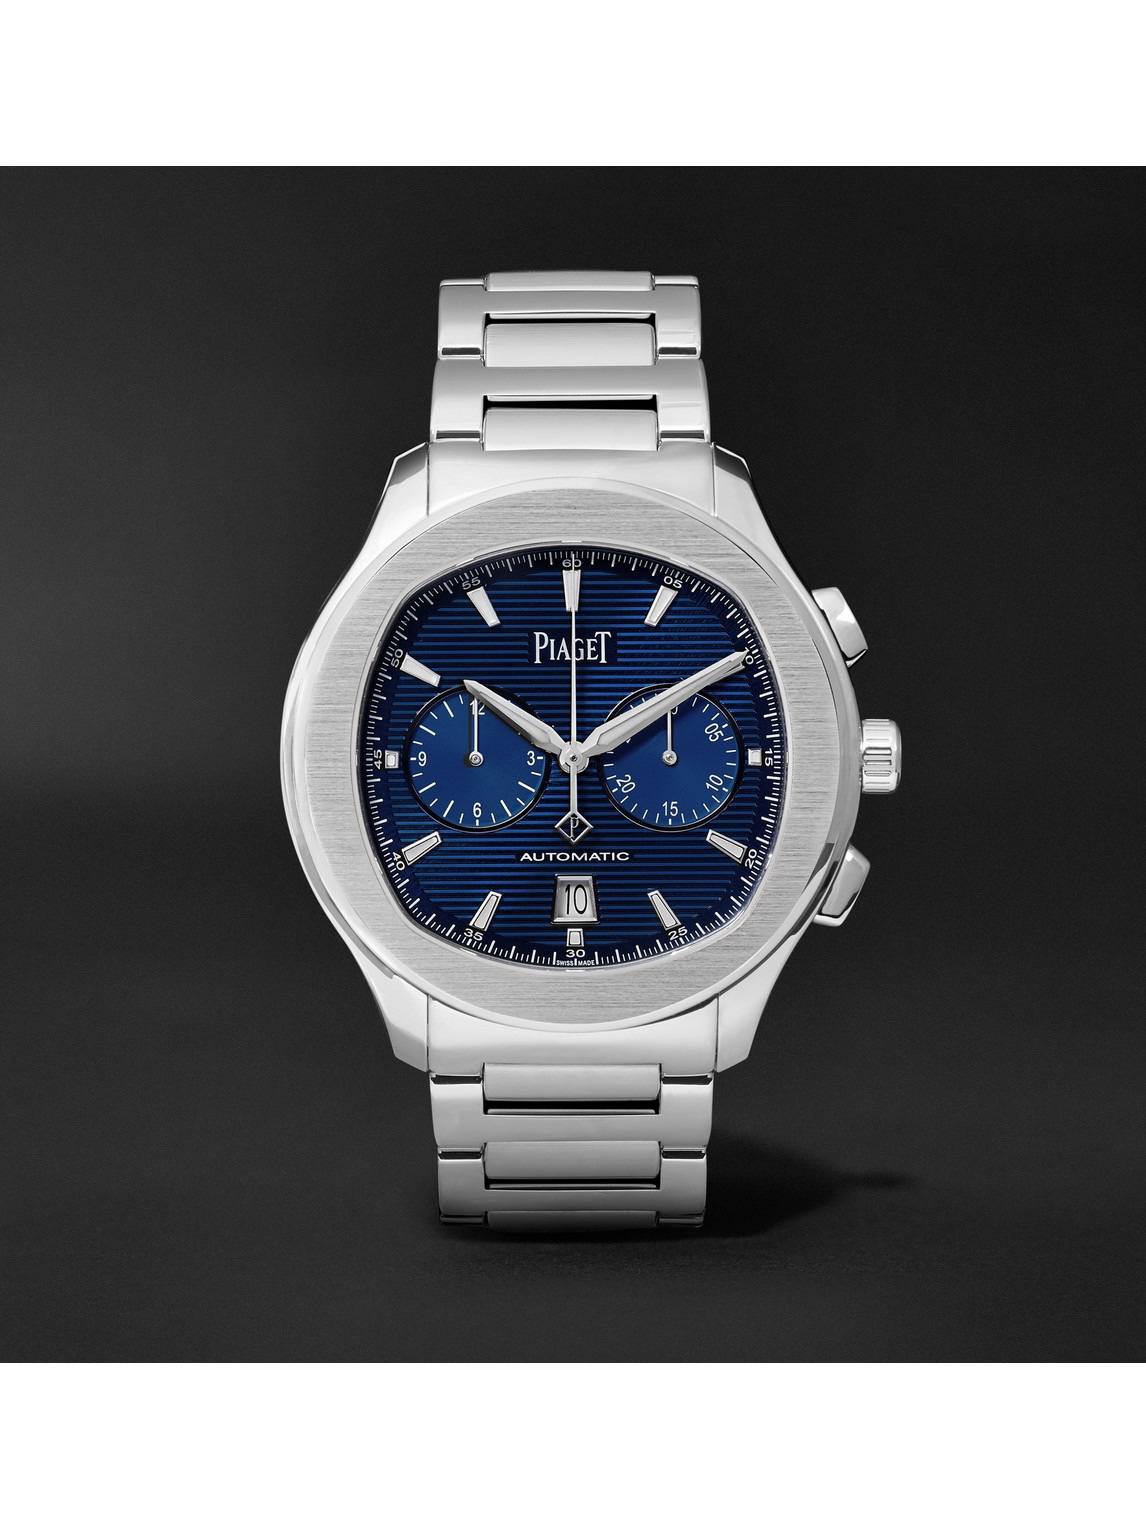 Piaget Polo Automatic Chronograph 42mm Stainless Steel Watch, Ref. No. G0a41006 In Blue